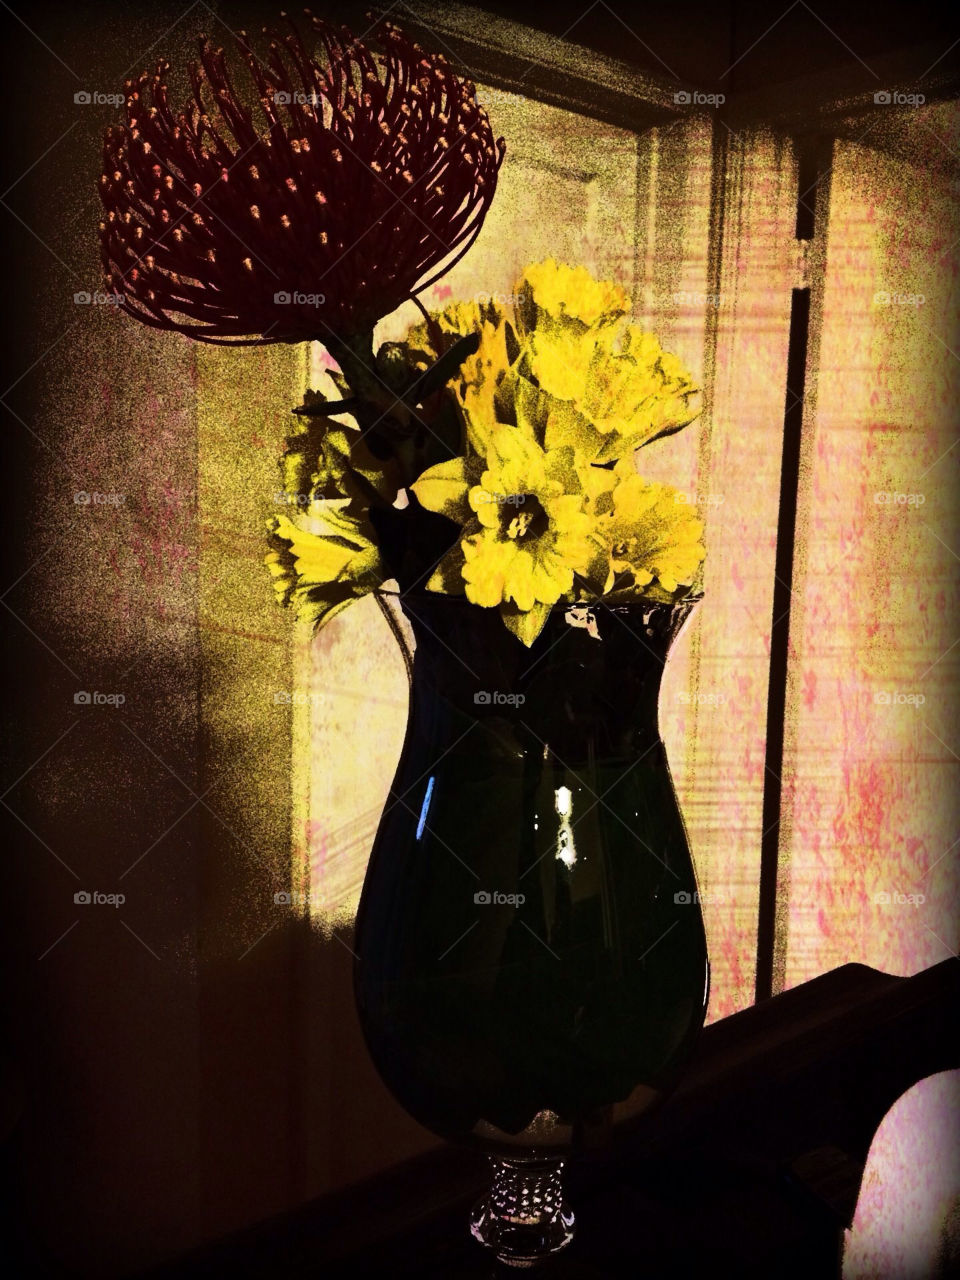 flowers yellow by karla4mois